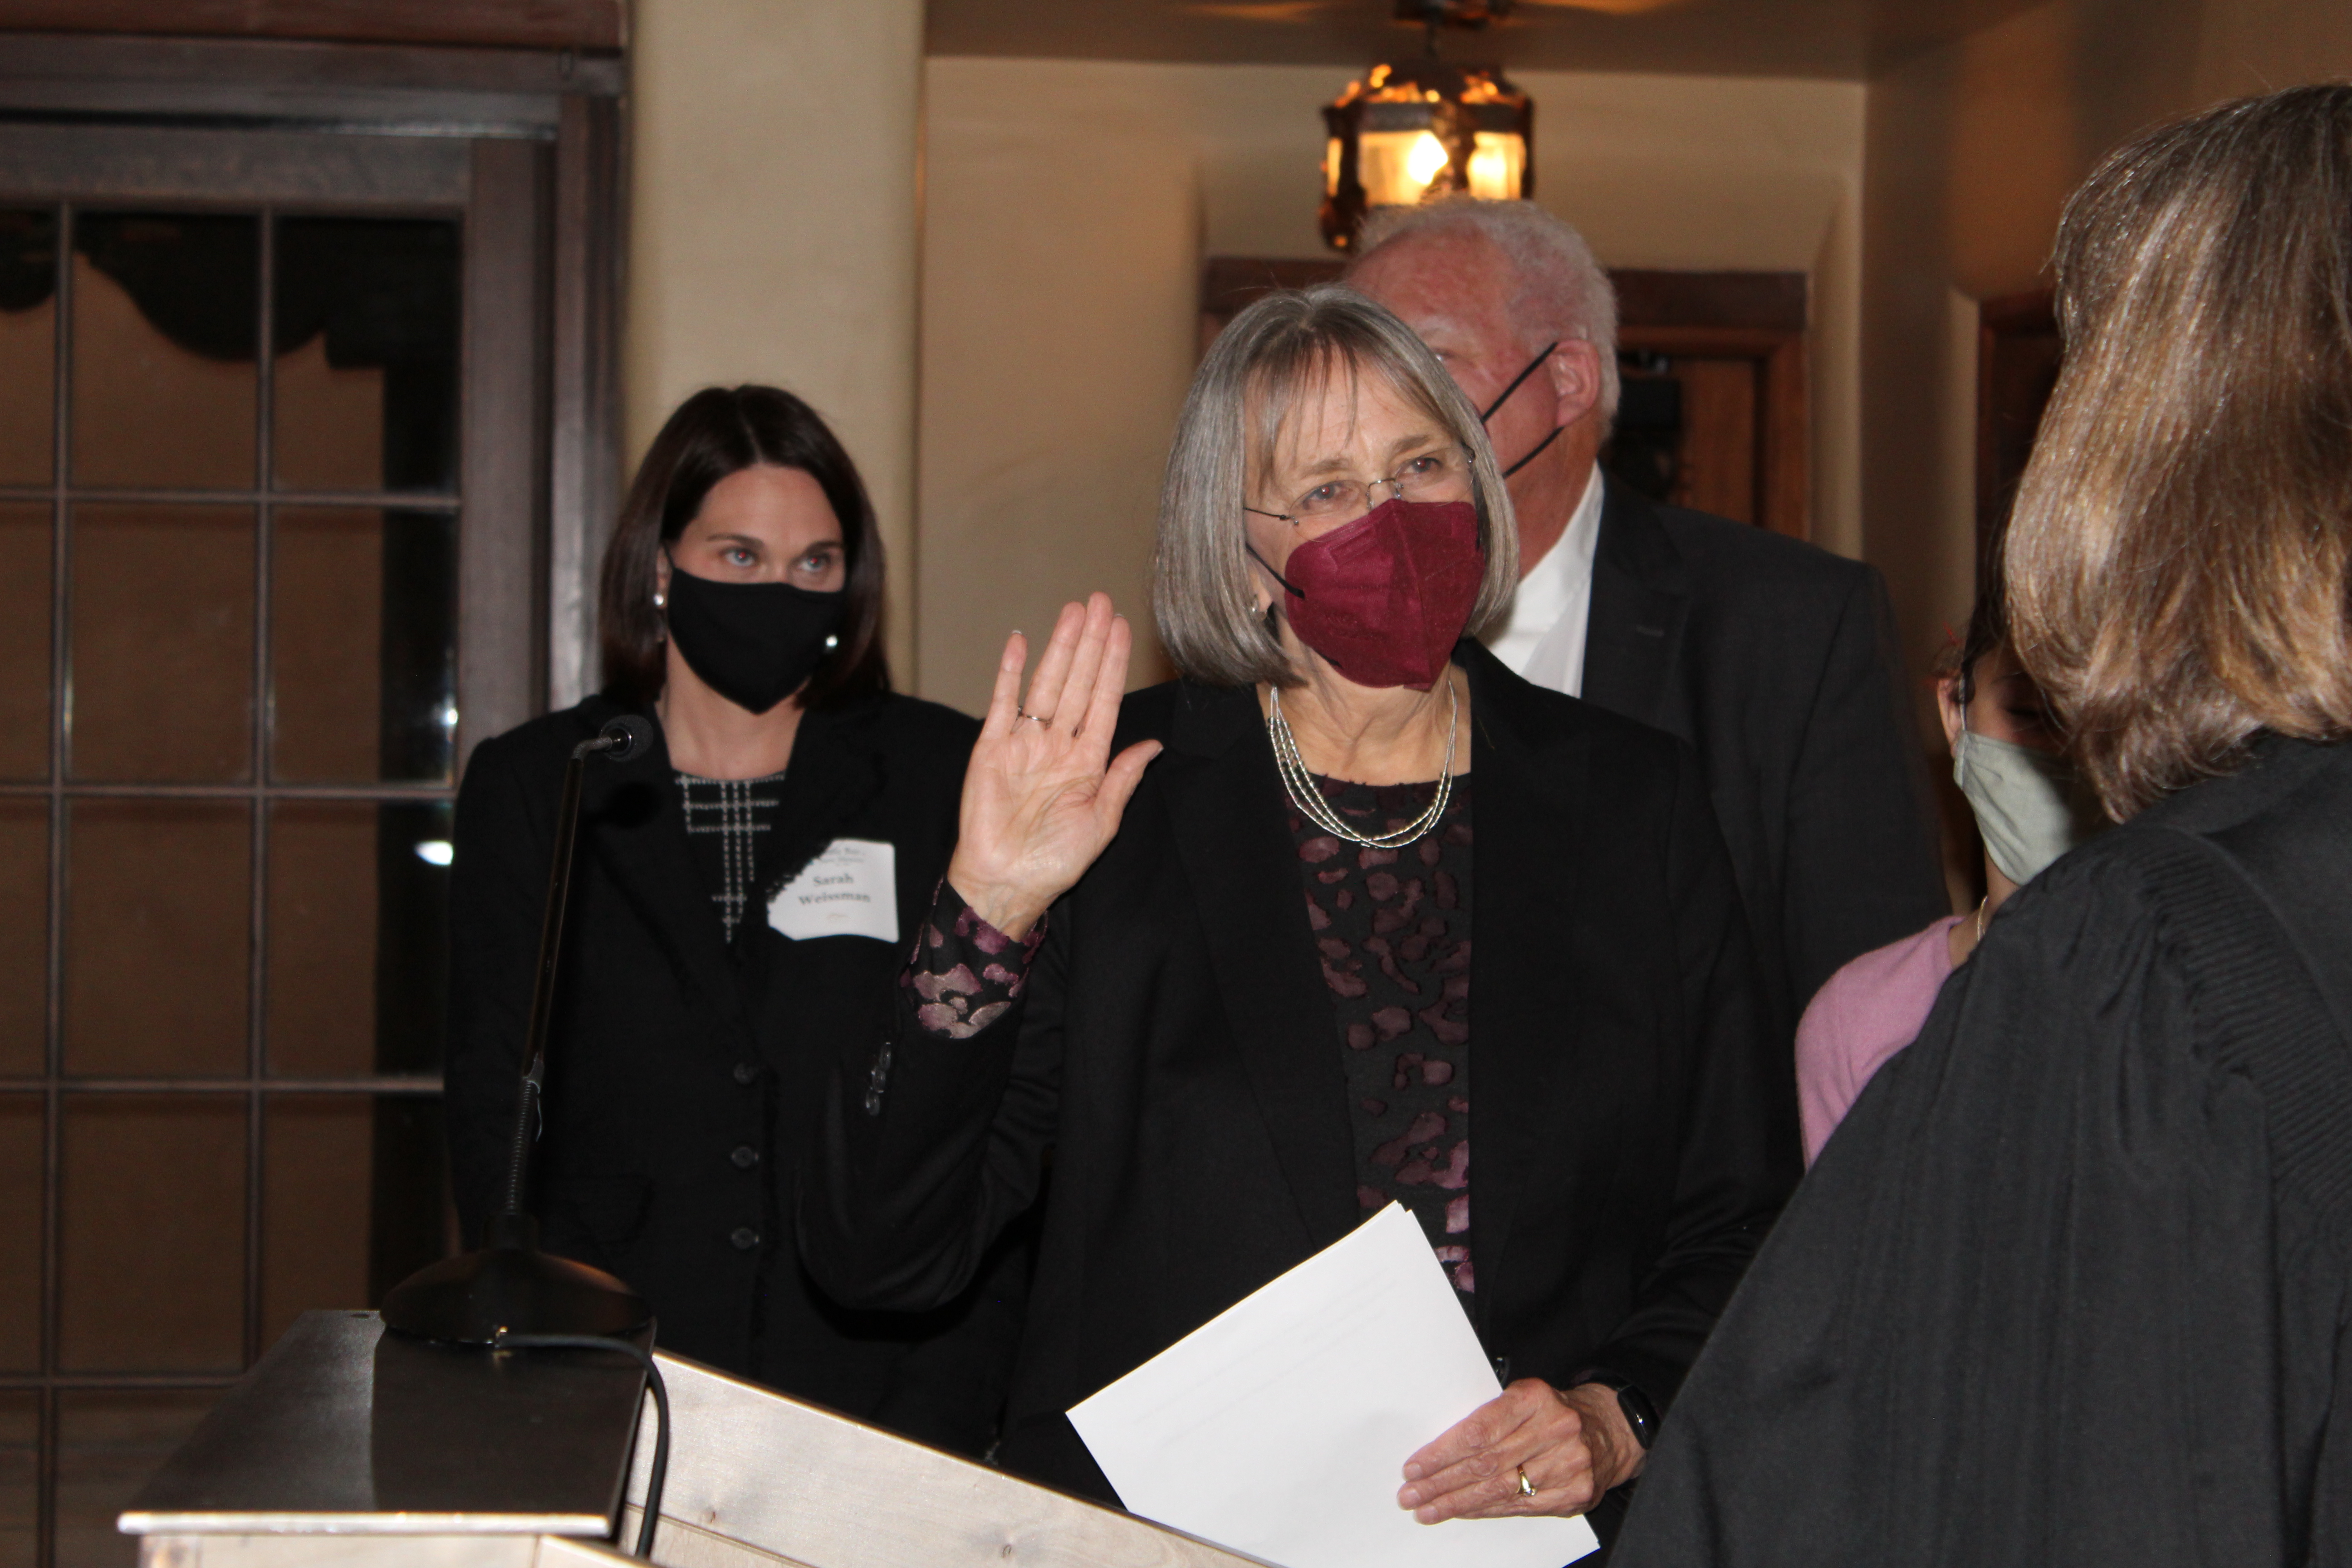 President Carolyn Wolf is sworn in by New Mexico Supreme Court Justice Shannon Bacon